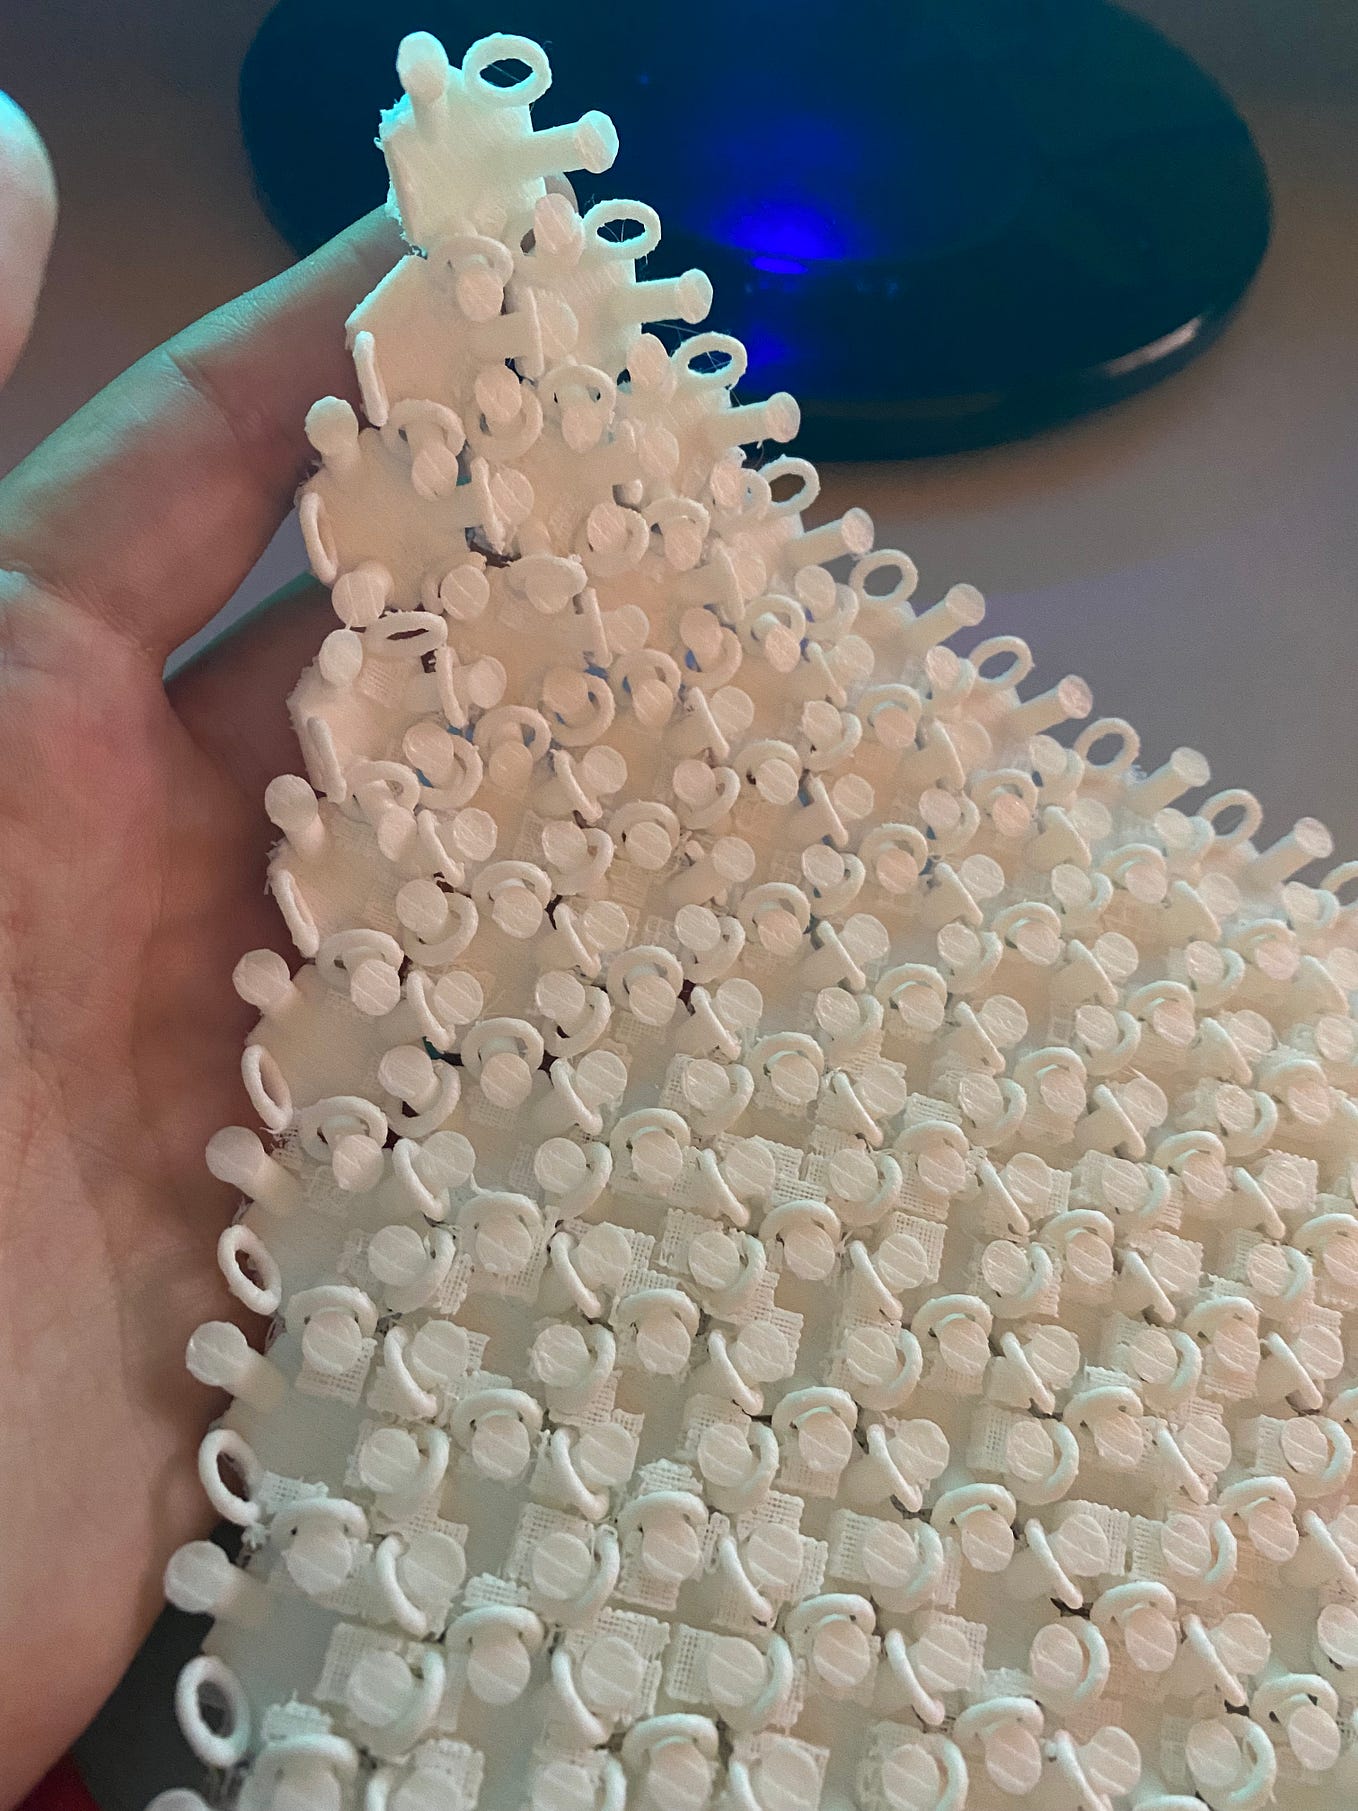 I Replicated 3D Printed Chainmail